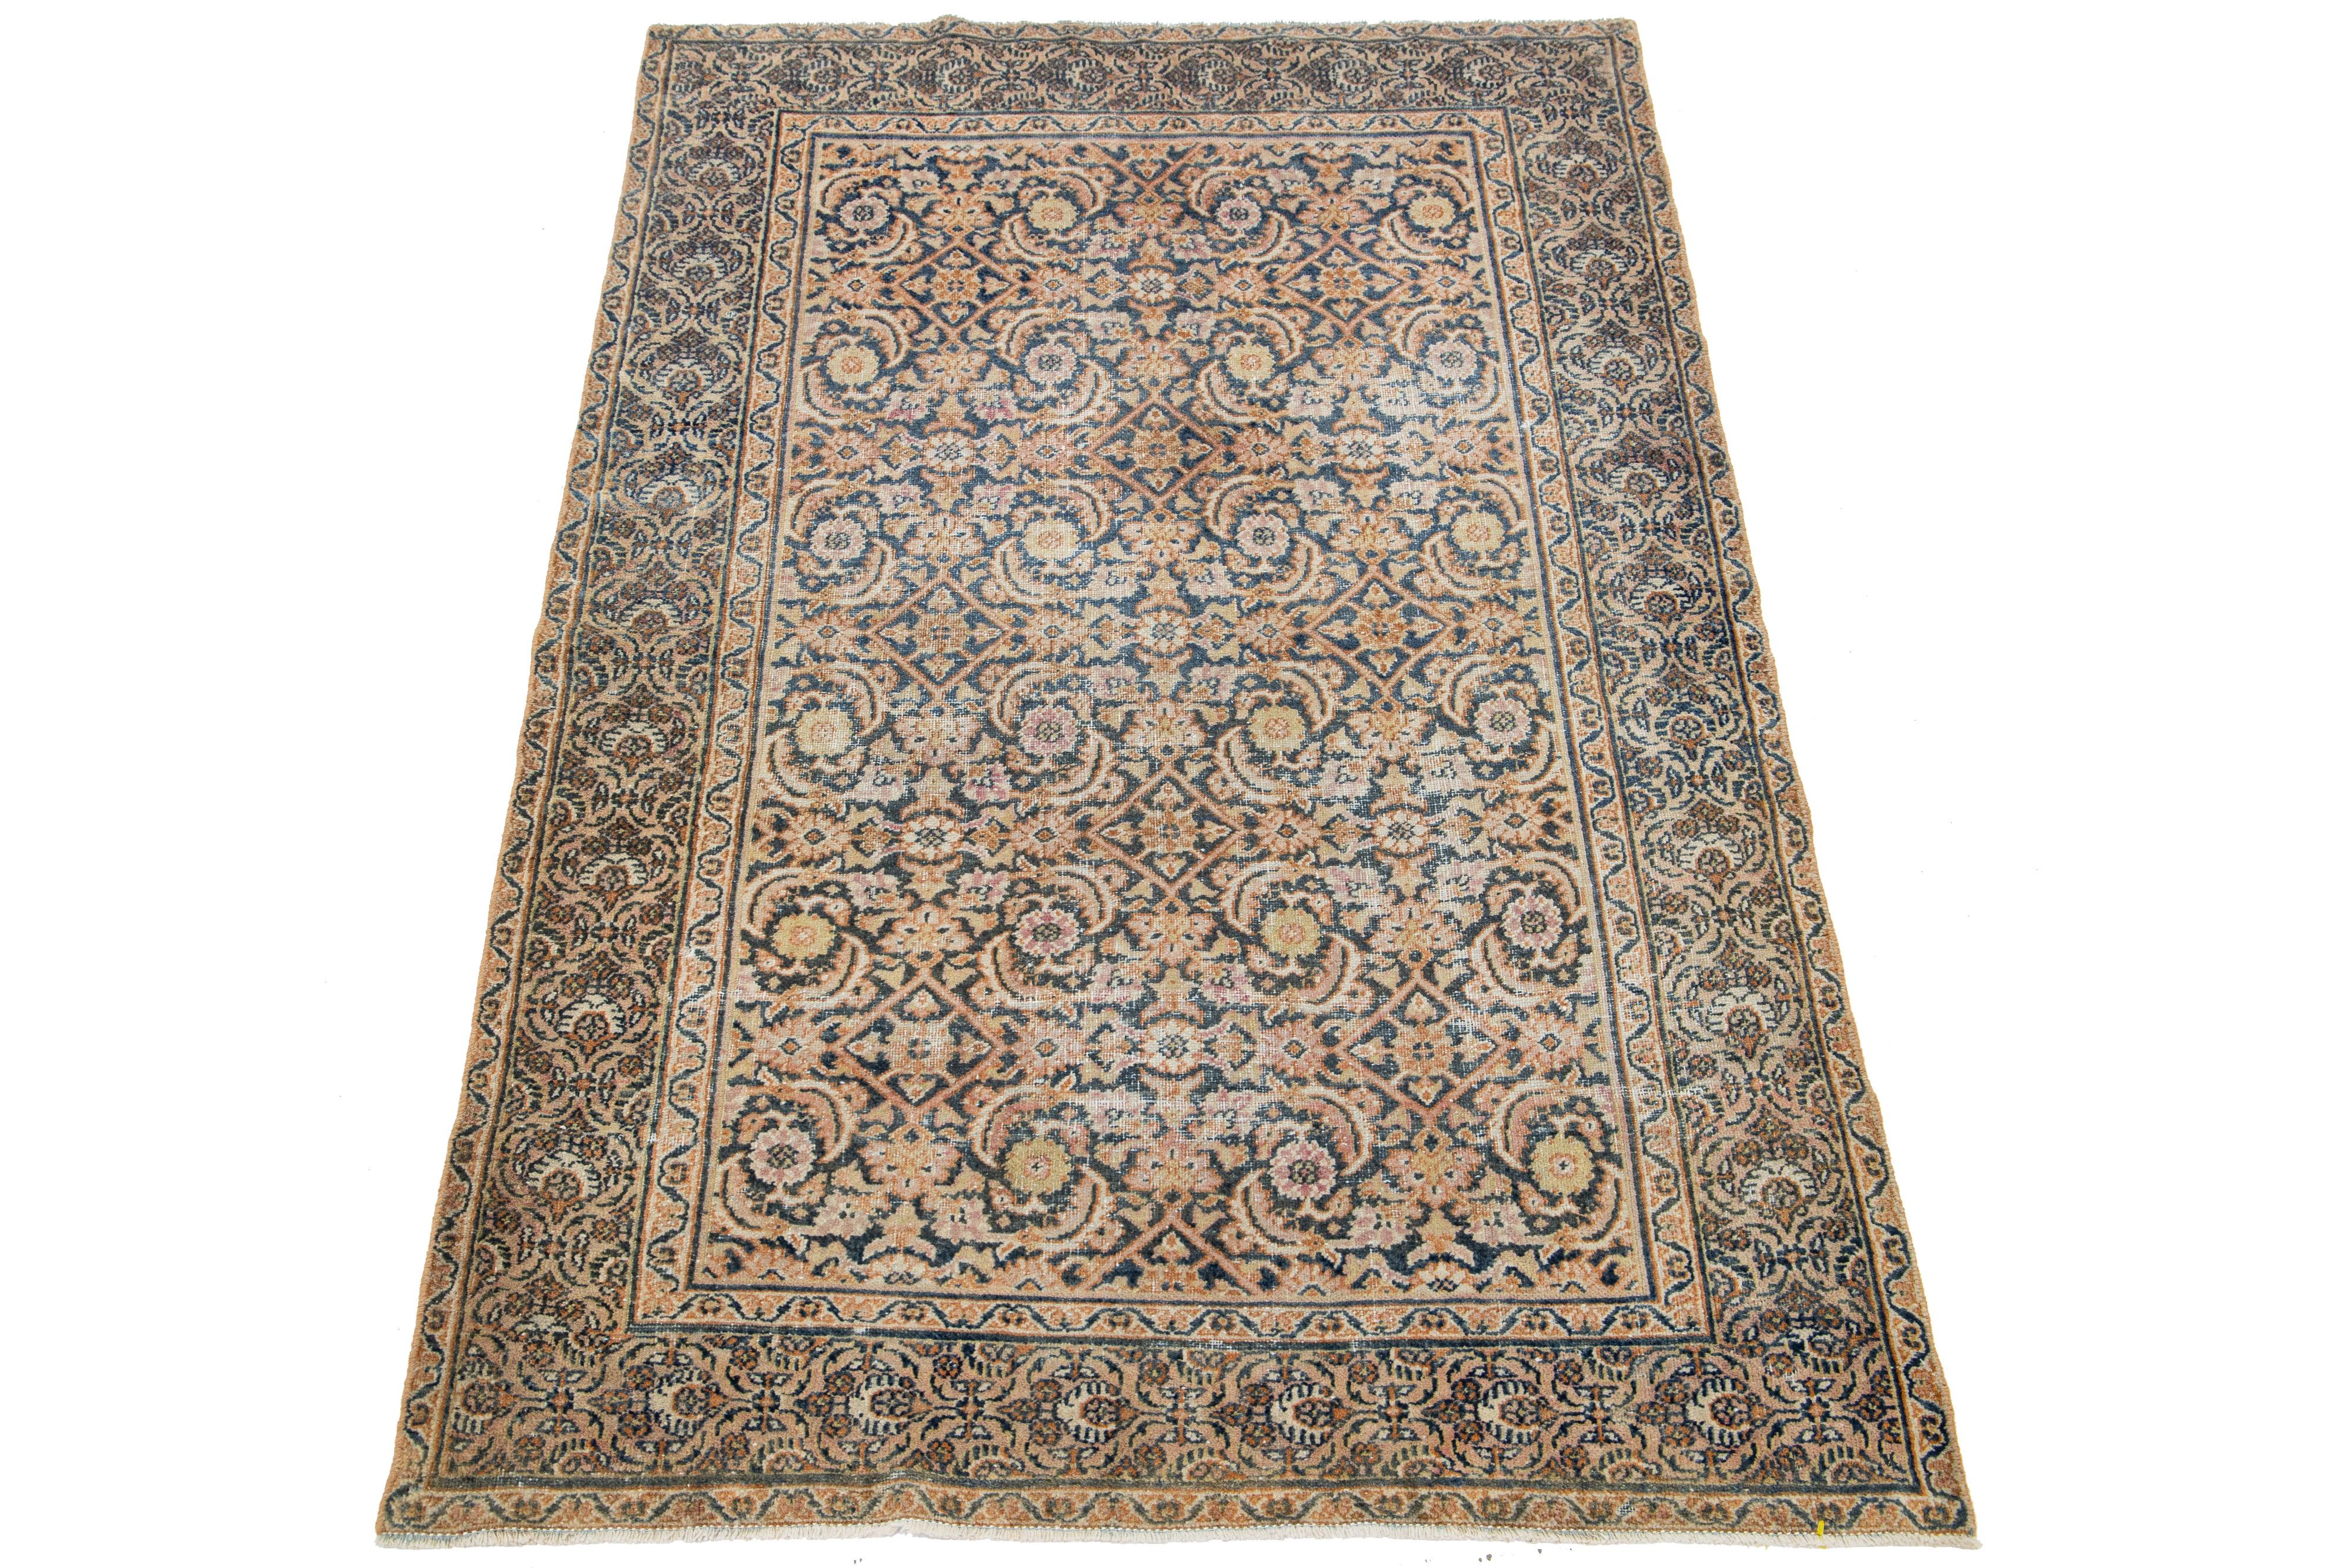 A Persian Tabriz wool rug from the 1920s showcases a handcrafted, traditional floral pattern. The design is accentuated by contrasting colors such as beige, orange, pink, and blue in the field.

This rug measures 3'9